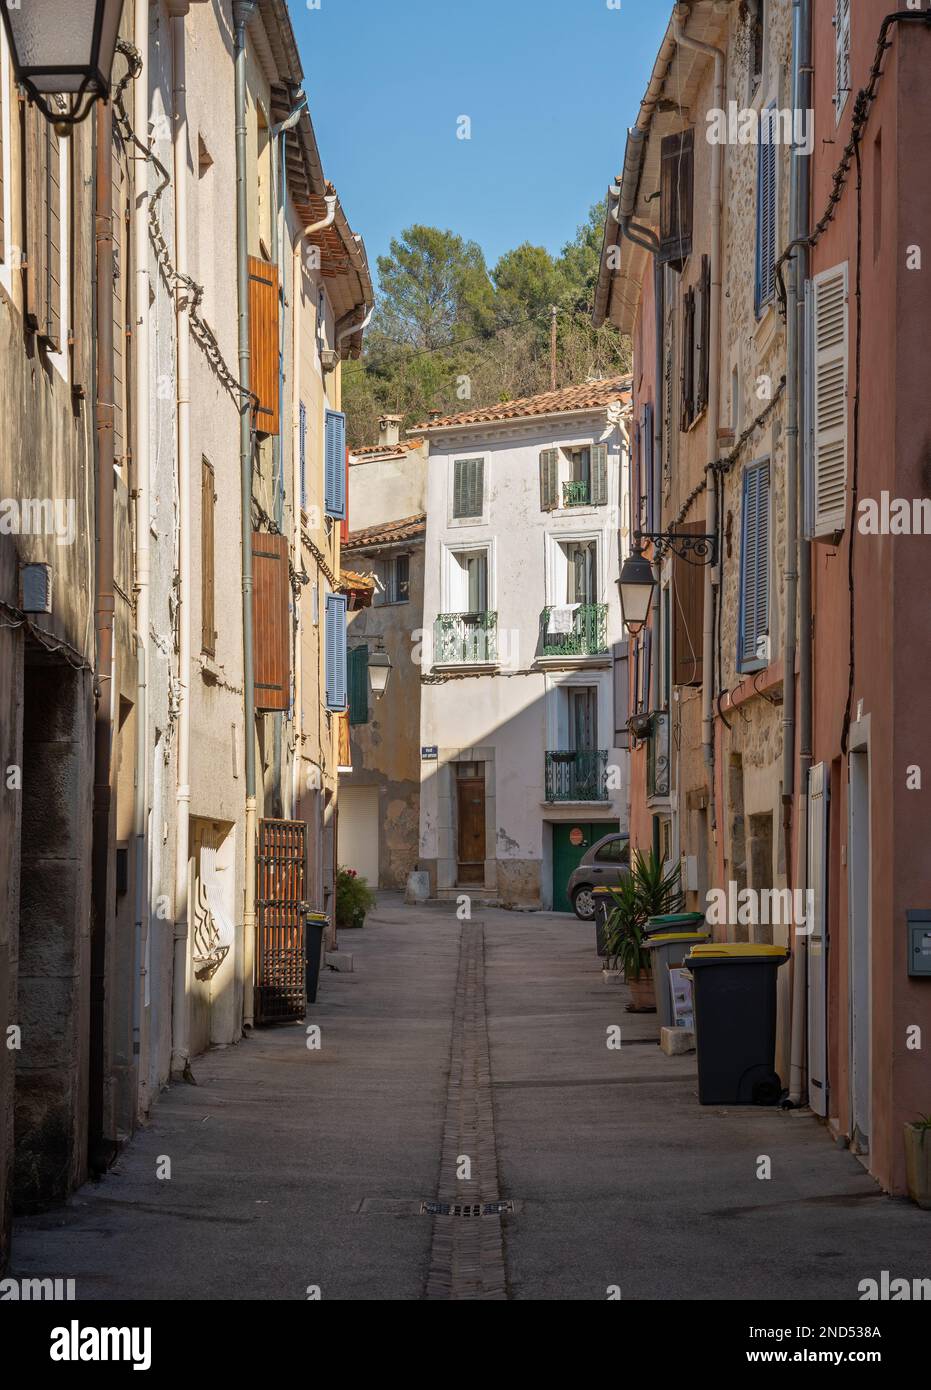 View of a street in the small town of La Roquebrussane in the Var department, in the Provence region of France Stock Photo